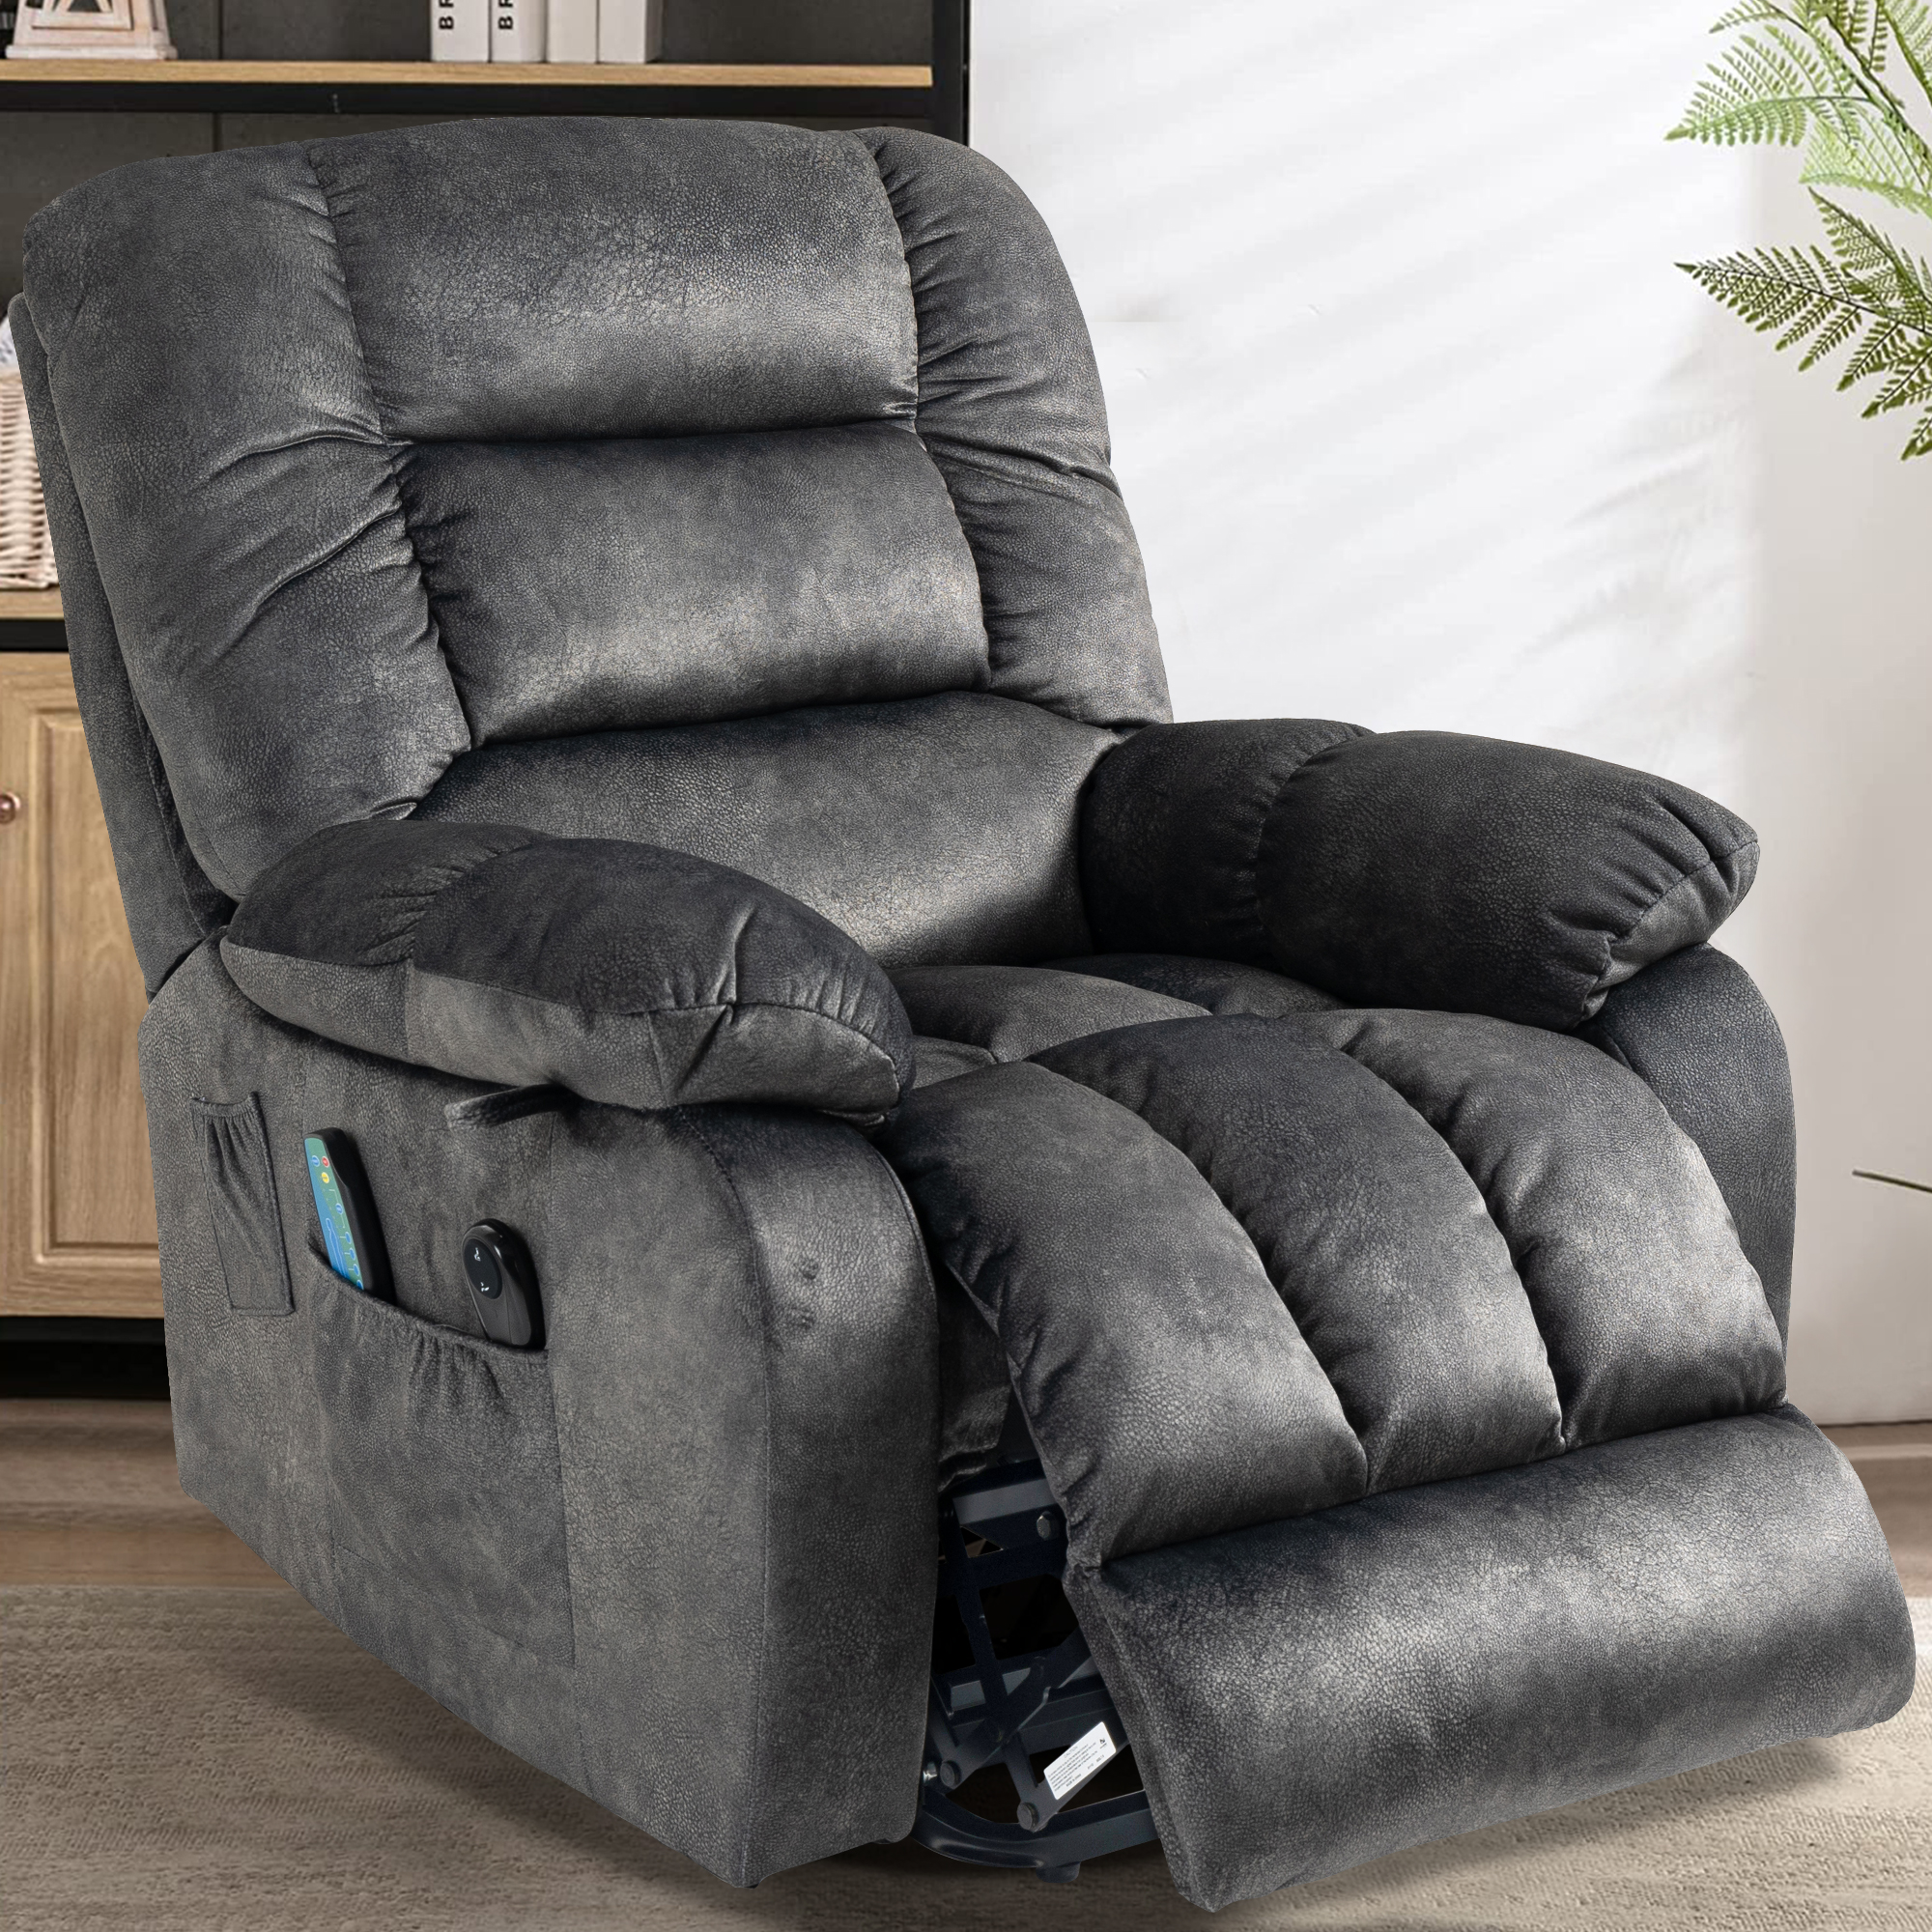 Power Lift Recliner Chair, Elderly Sofa with Heat Therapy and Massage Function, Heavy Duty Reclining Mechanism Electric Recliner with Side Pocket for Living Room Bedroom Home Theater, Beacon Grey - image 2 of 12